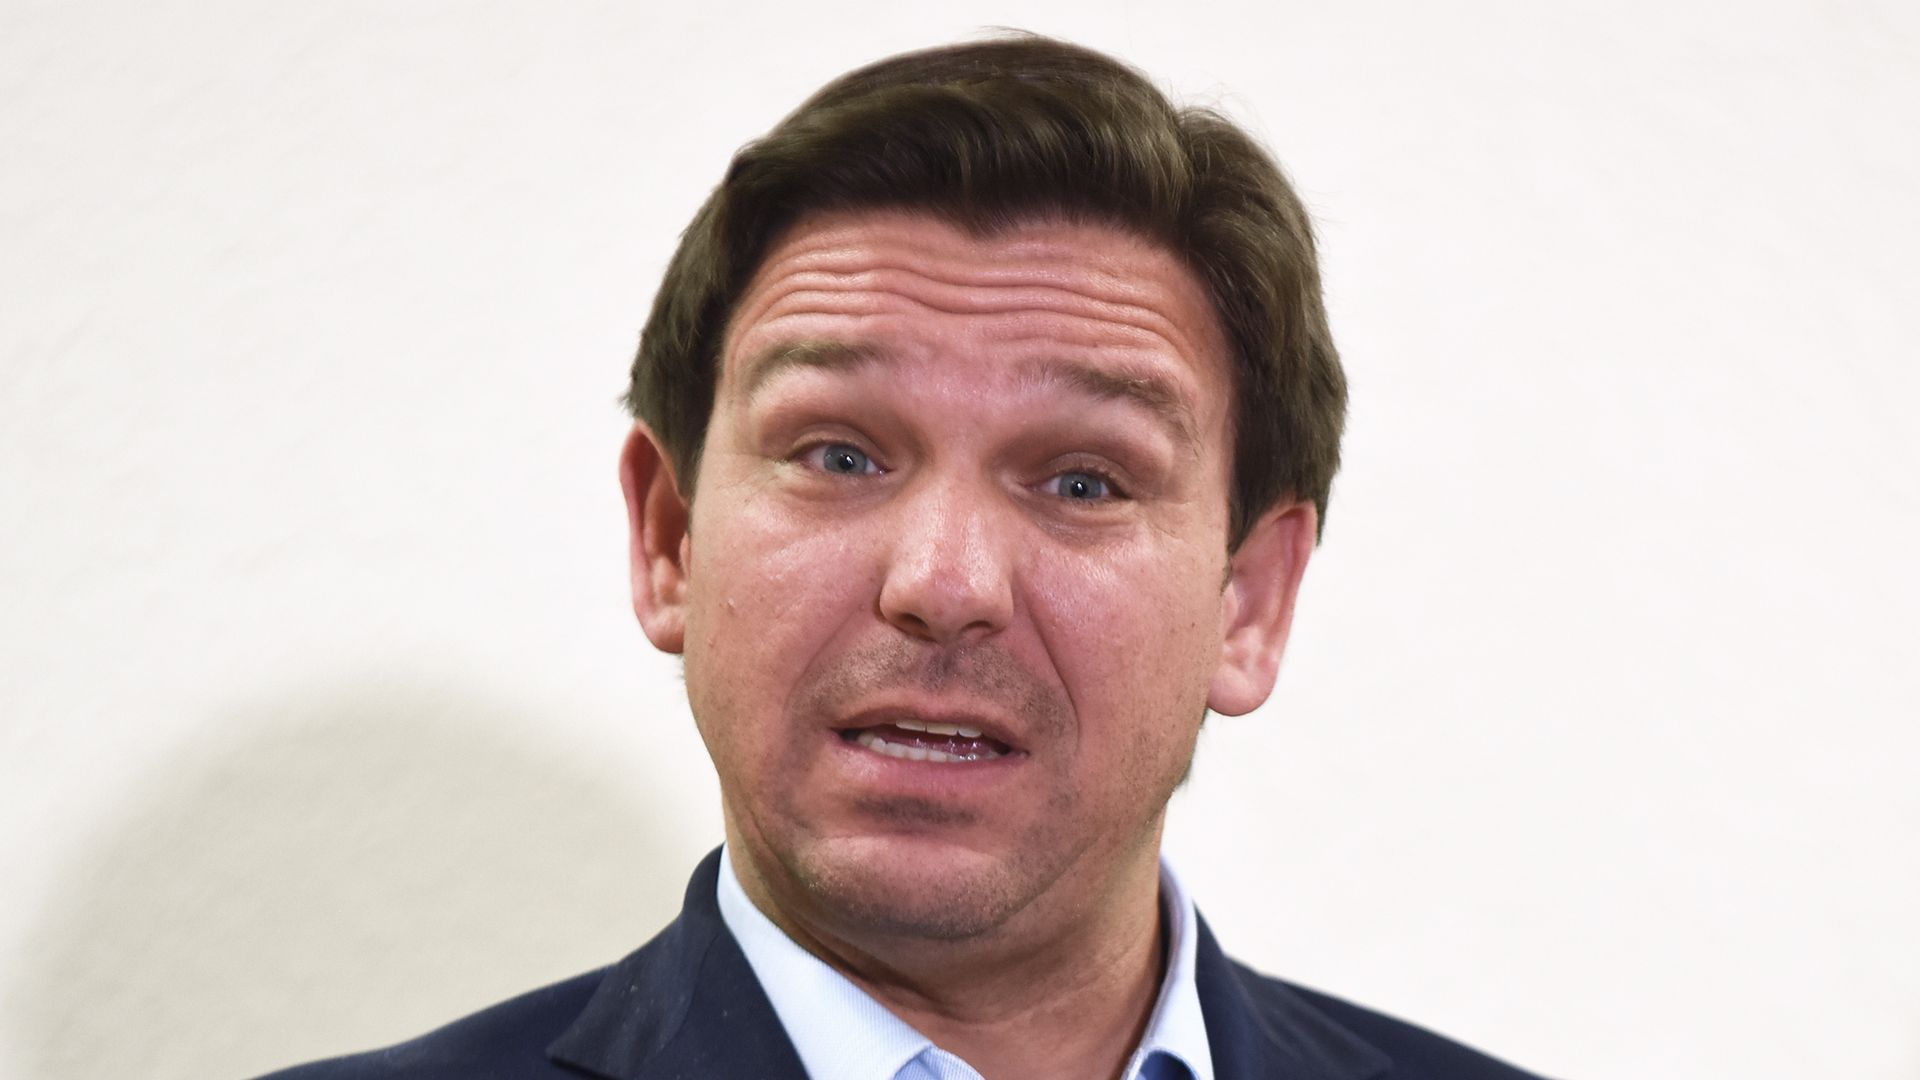 Florida Governor Ron DeSantis speaking at a press conference in Lakeland on Aug. 21.